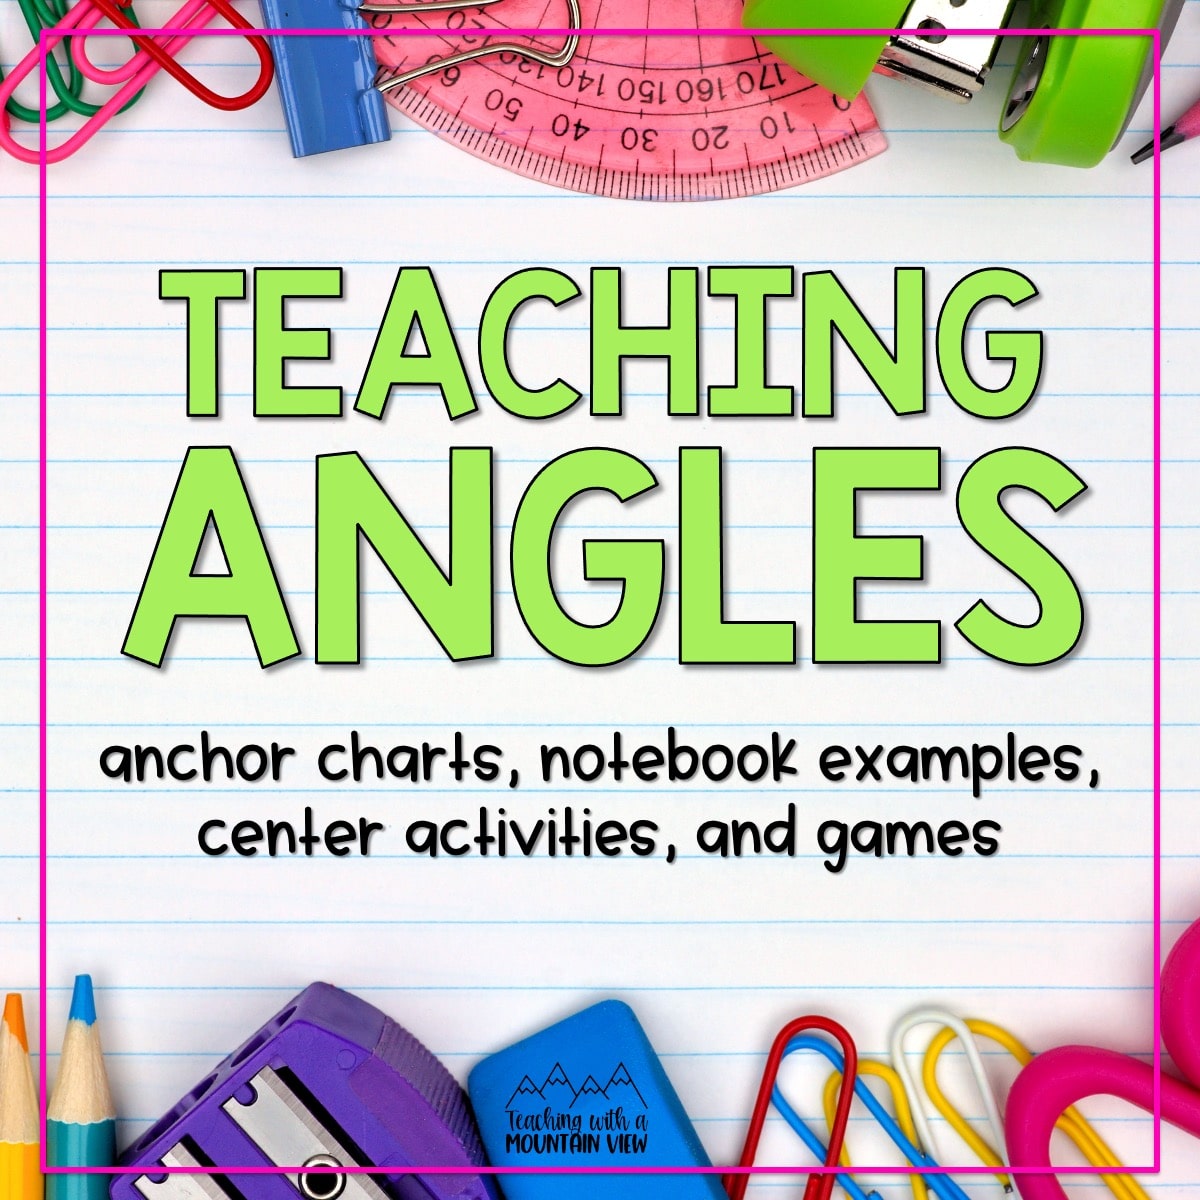 Anchor charts, notebooks, and activities for teaching angles in upper elementary. Includes task cards, games, and more too!